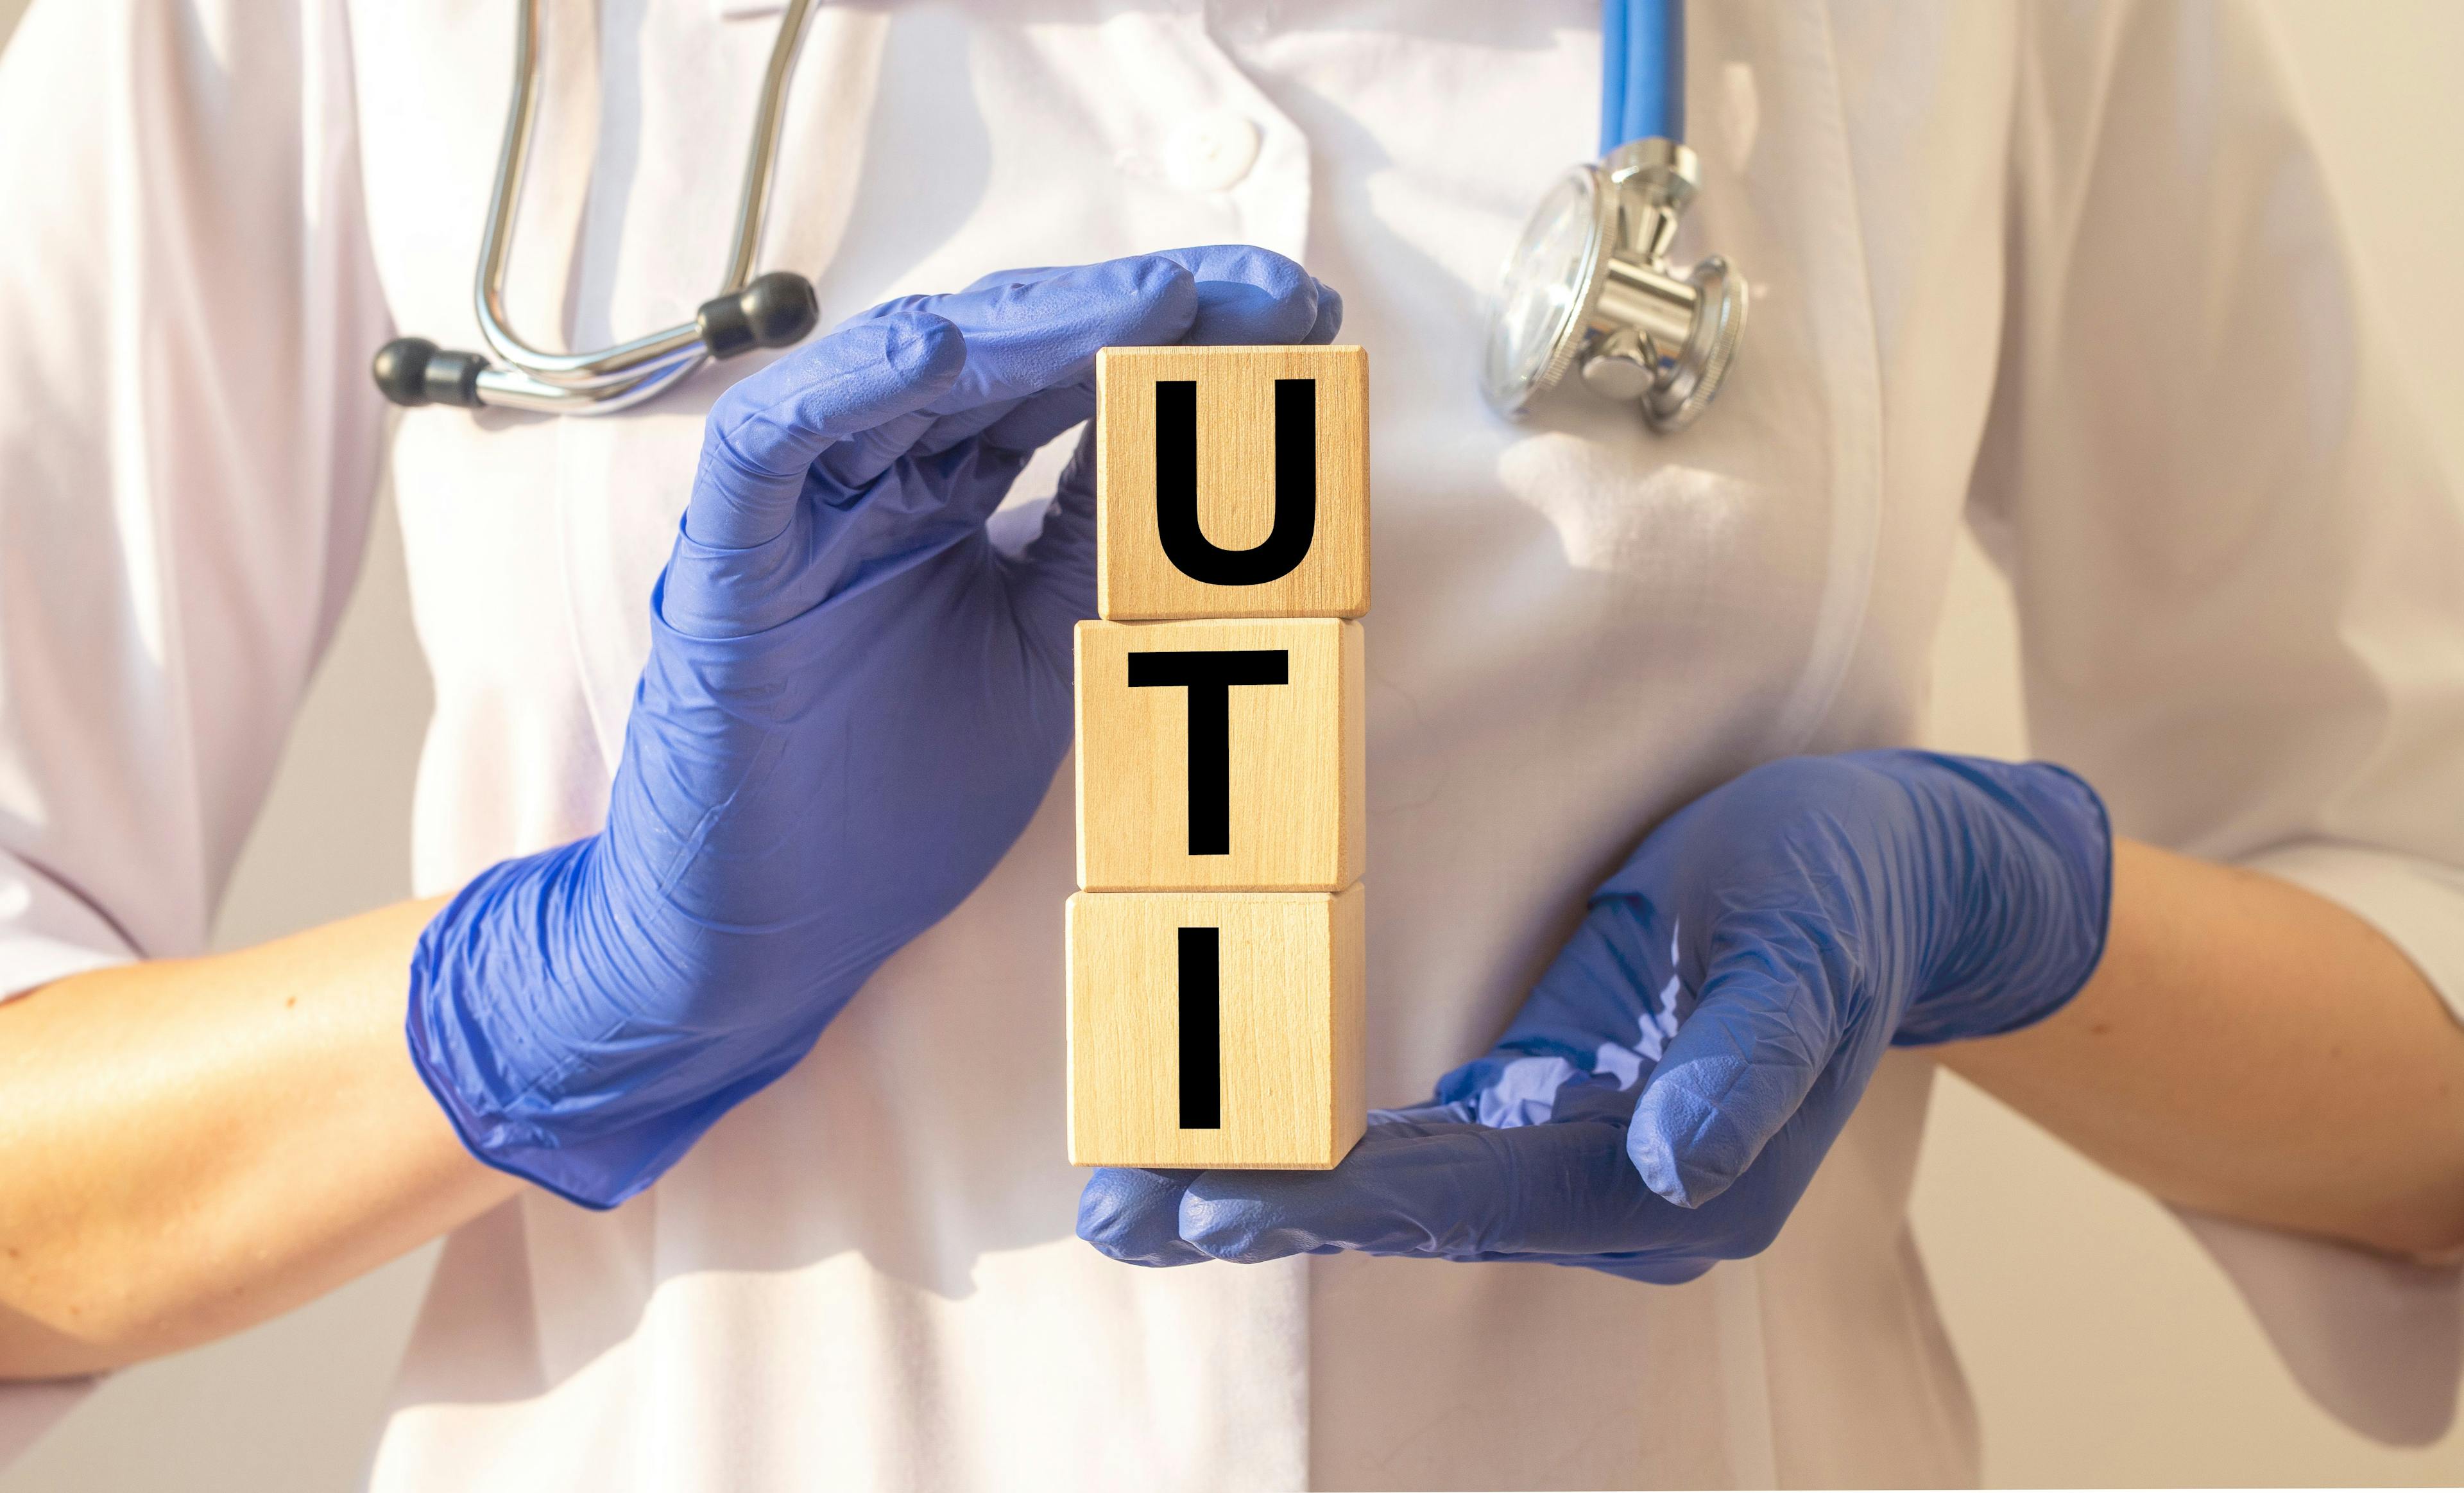 Infant UTI and IBI prevalence decreased during COVID-19 pandemic